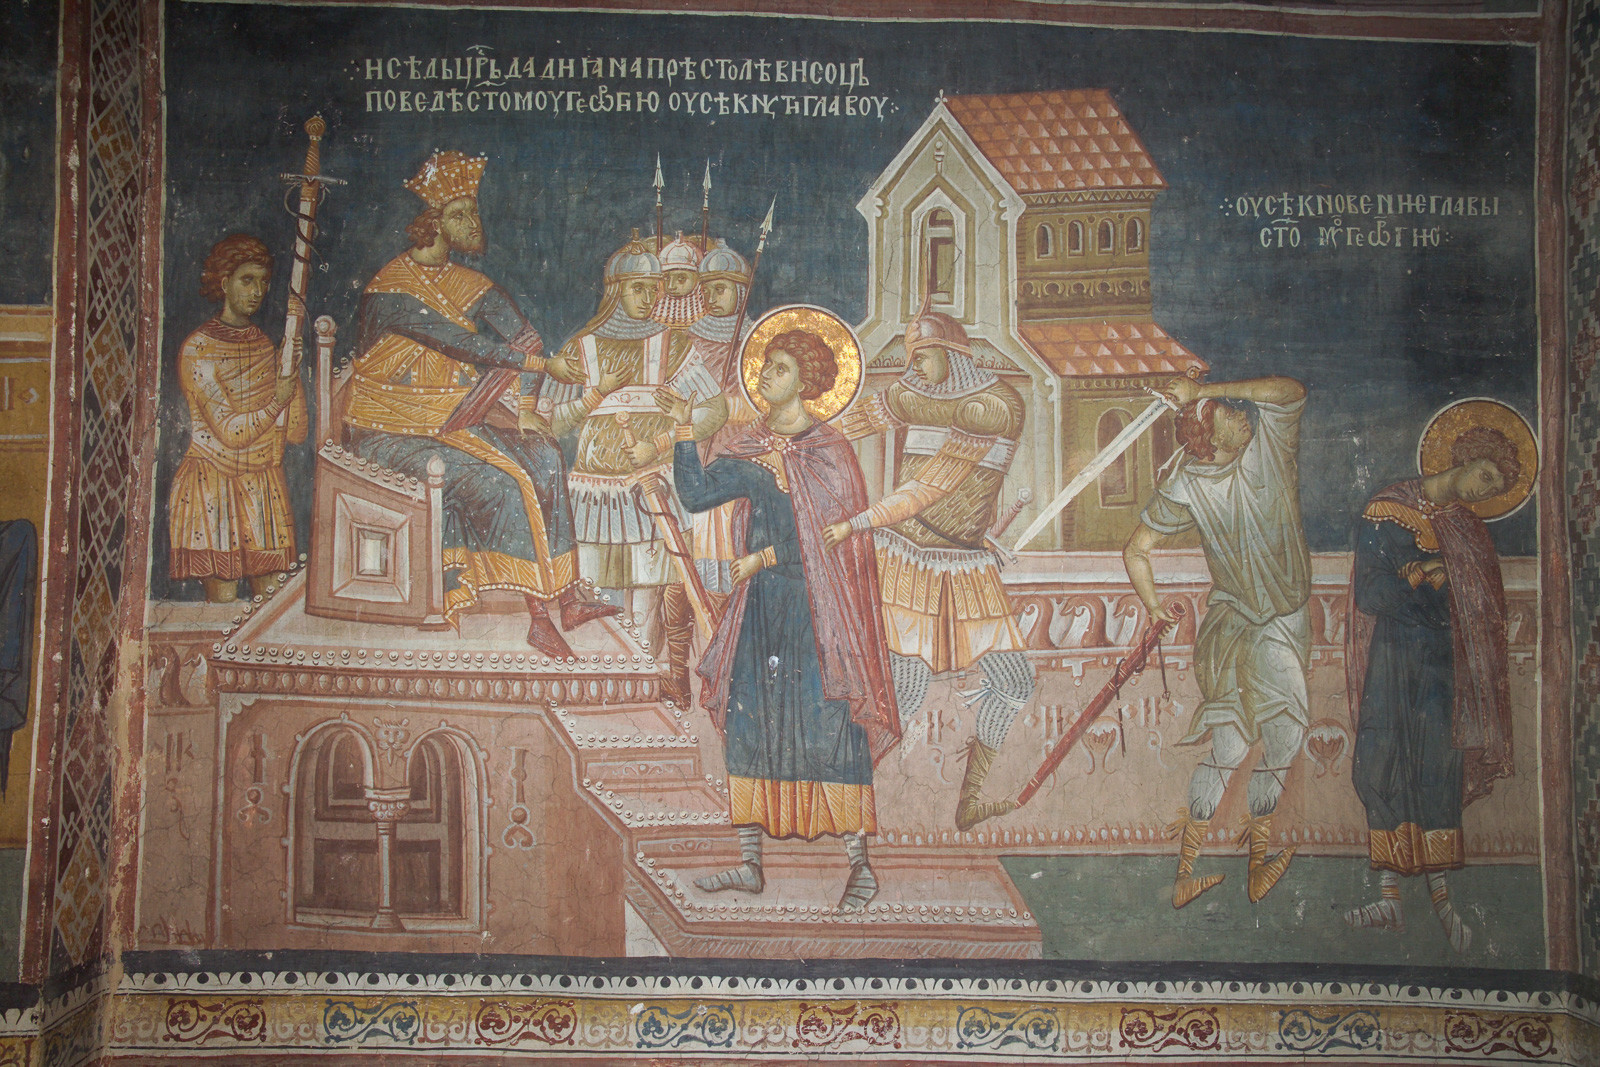 58,59 Sentencing of St. George and the Beheading of St. George